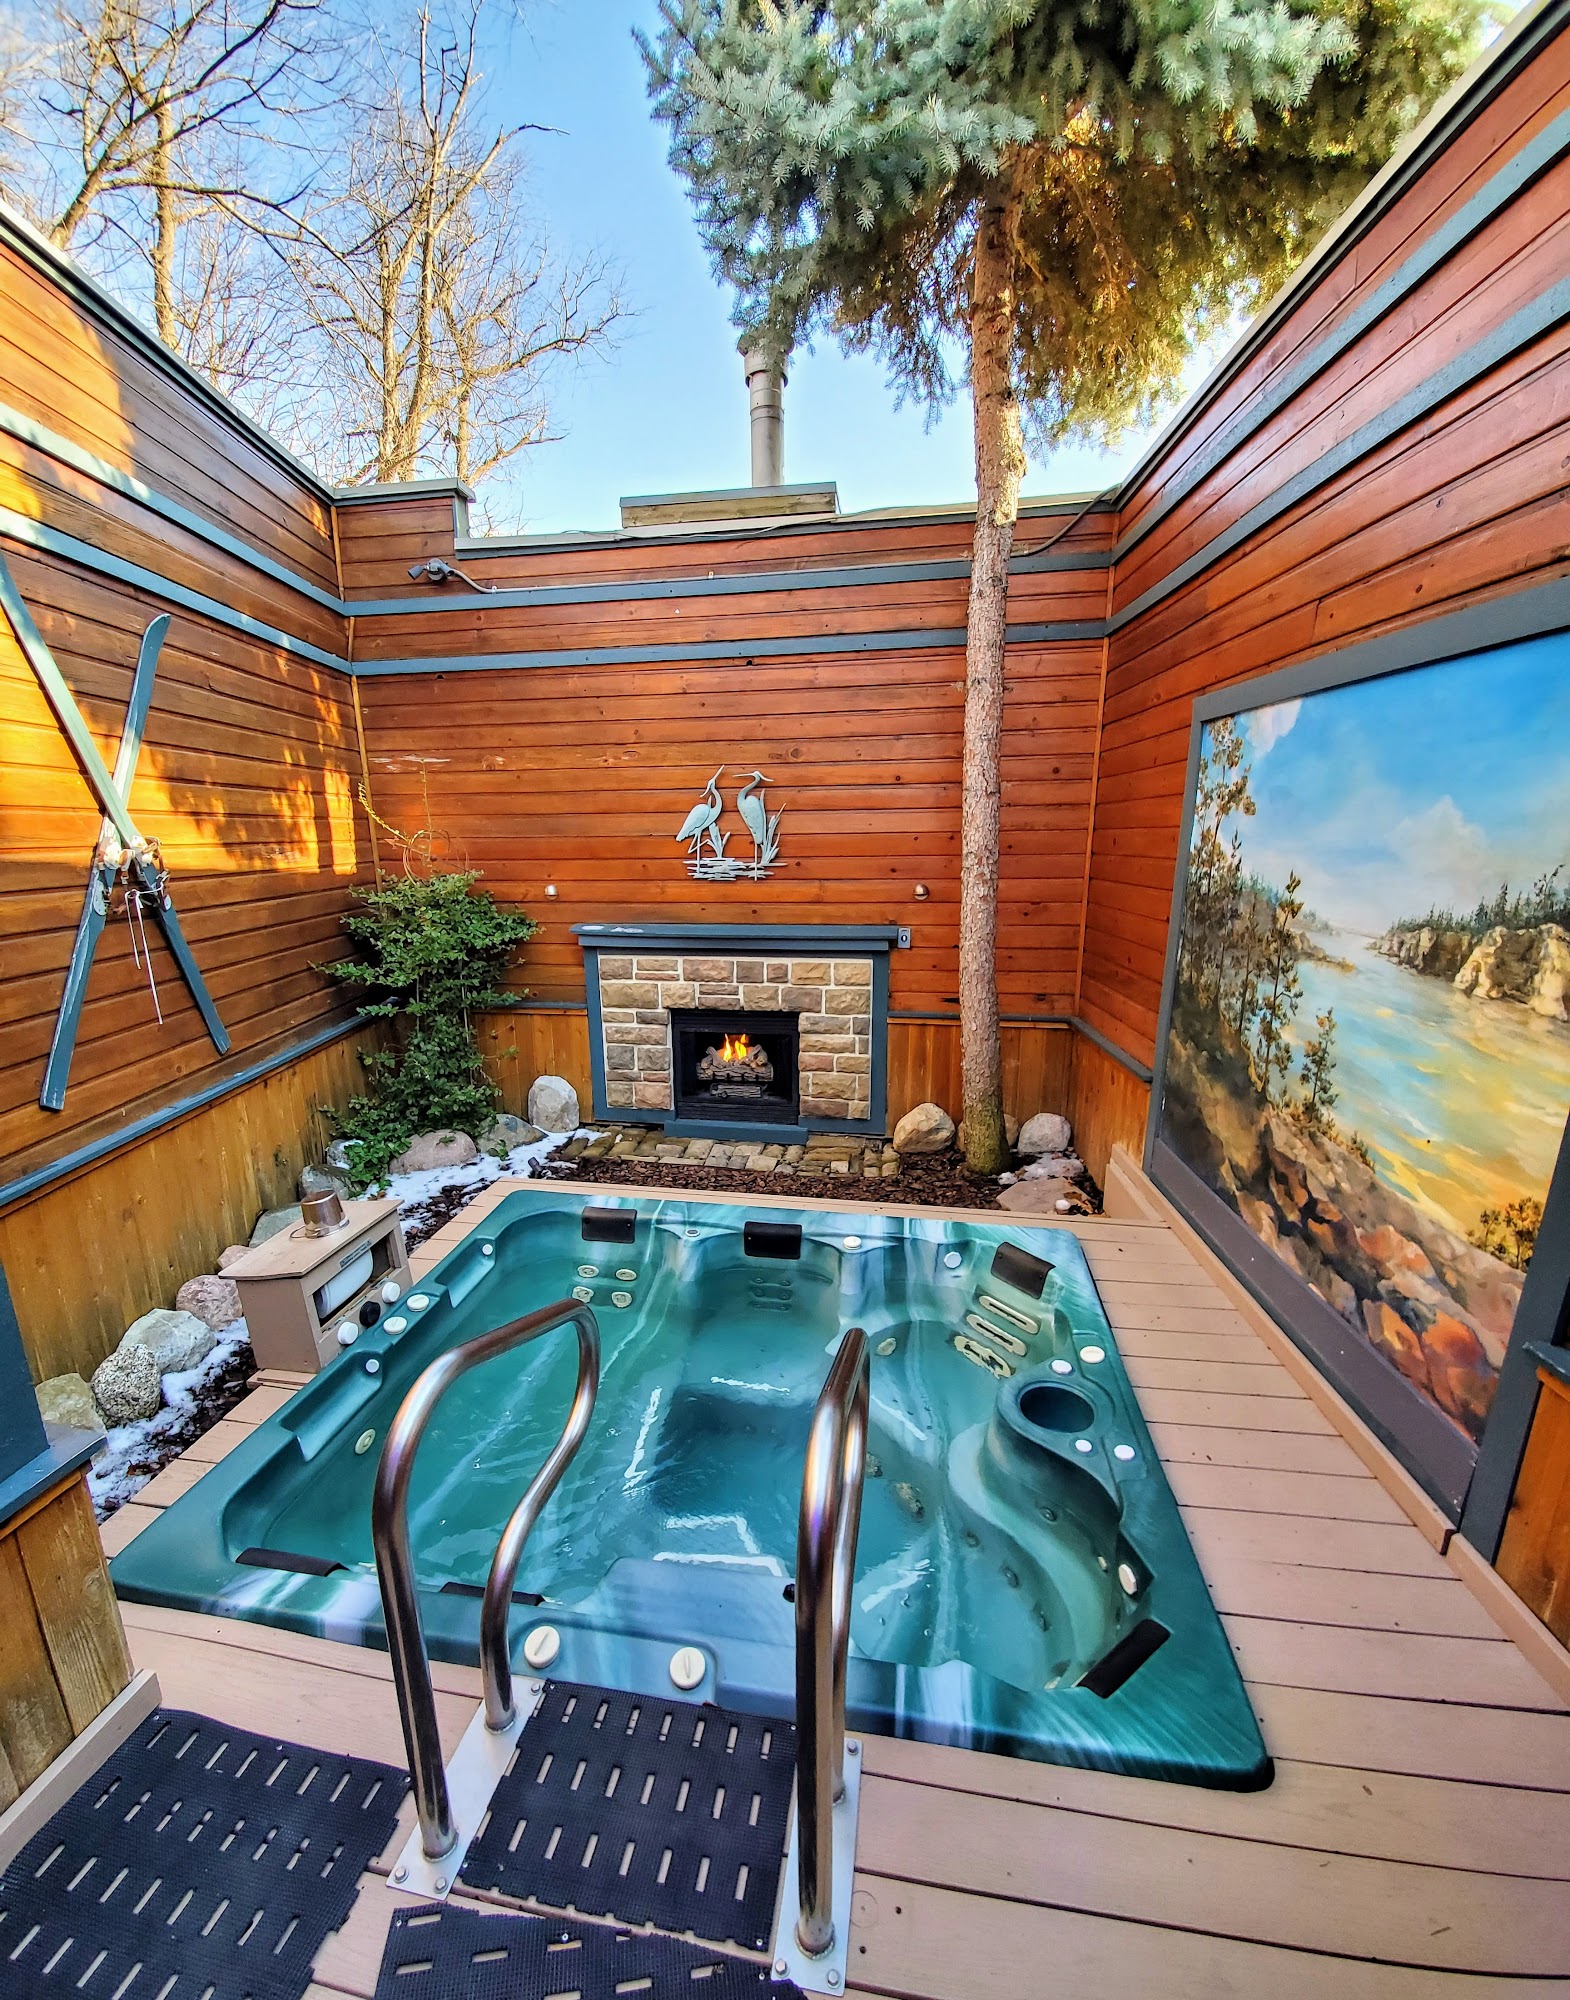 The Oasis Hot Tub Gardens